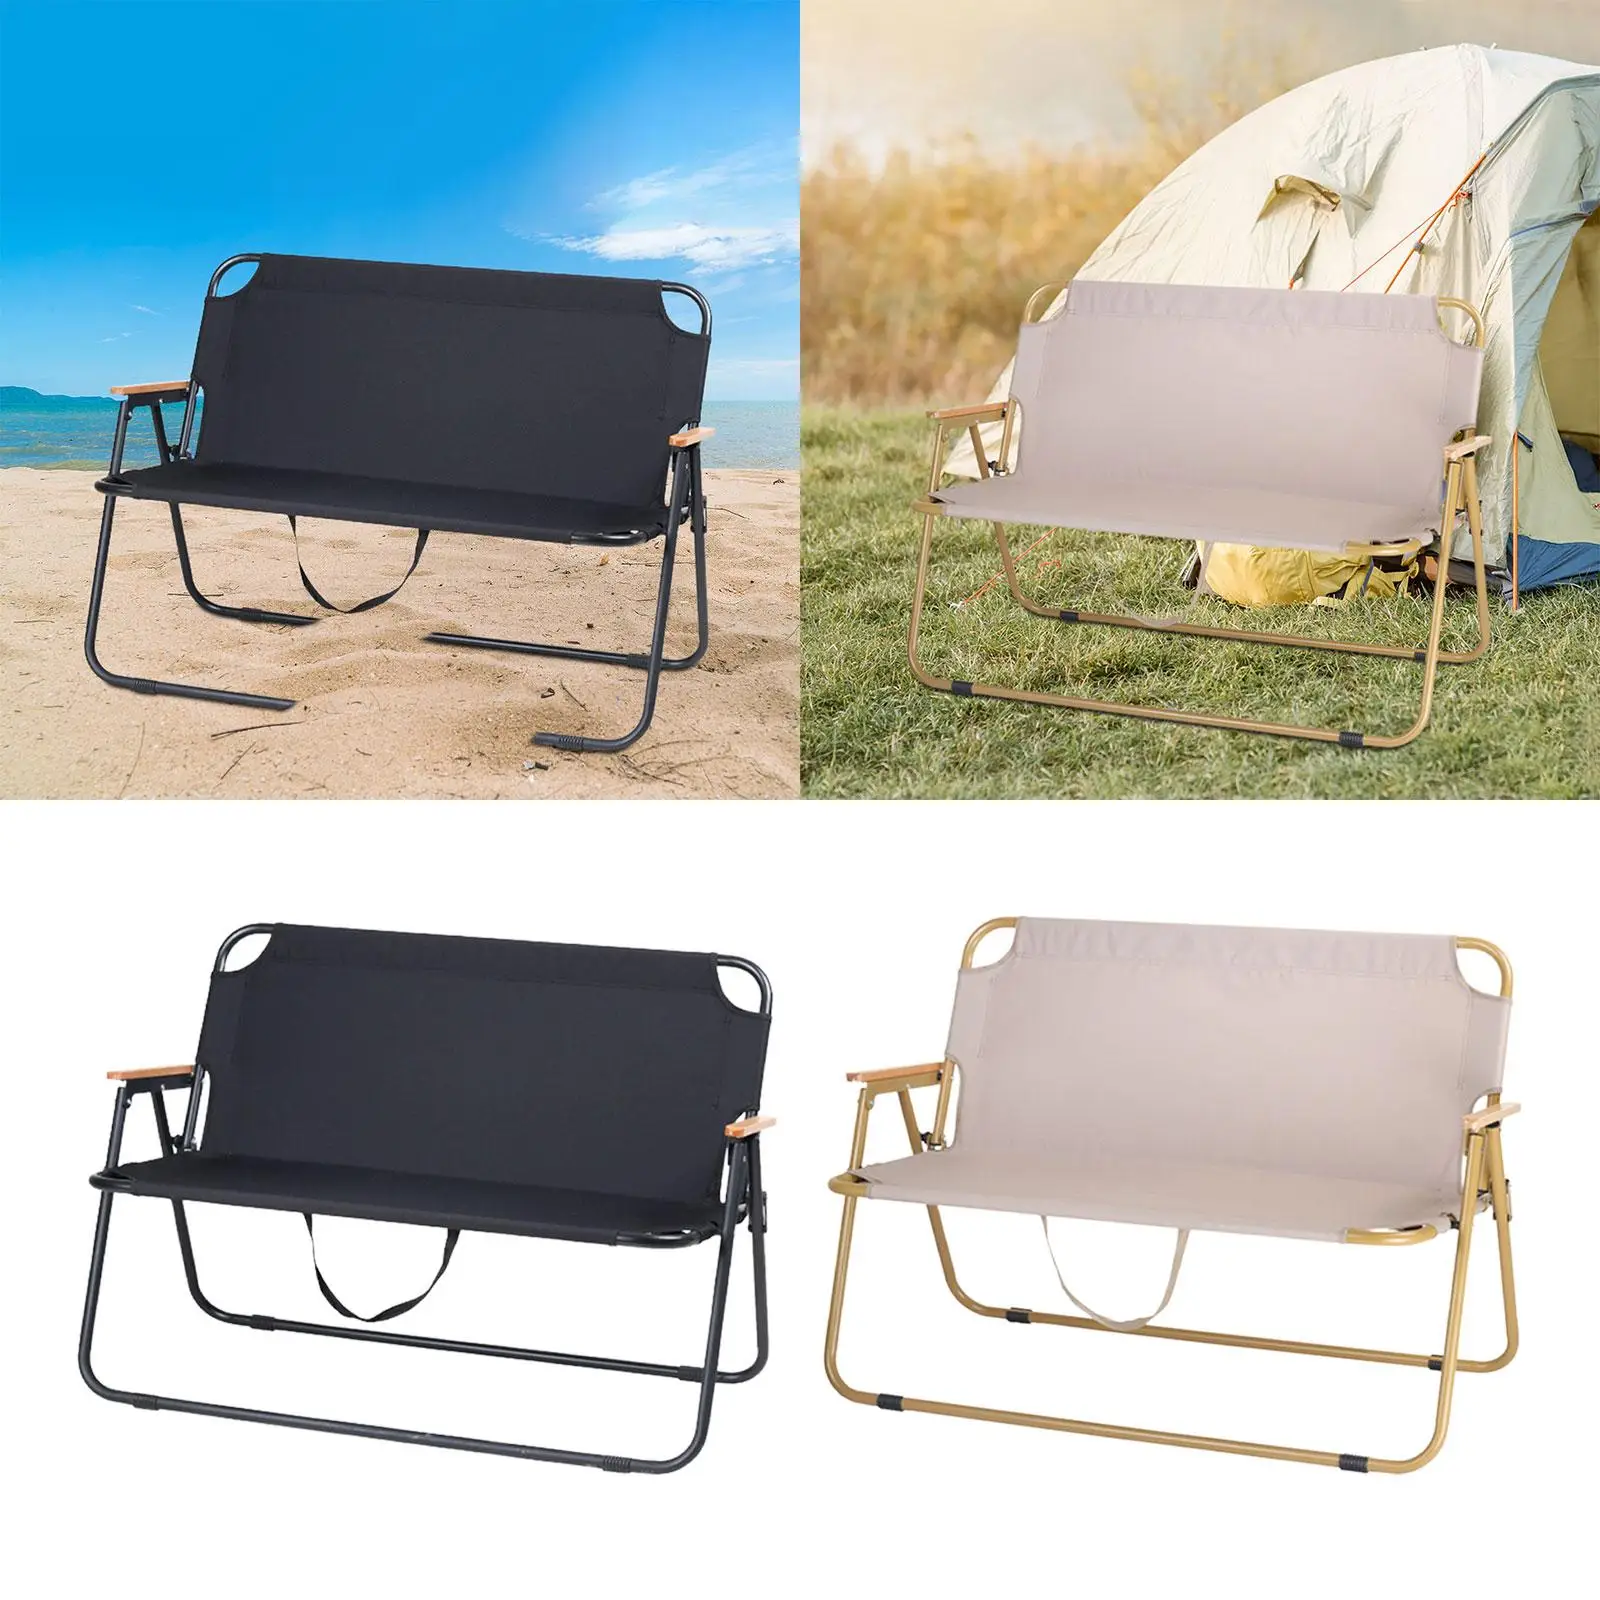 Folding Camping Chair Lightweight Double Chair Adult Outdoor Fishing Backpacking Patio Travel Hiking Camping Seat Camp Chair